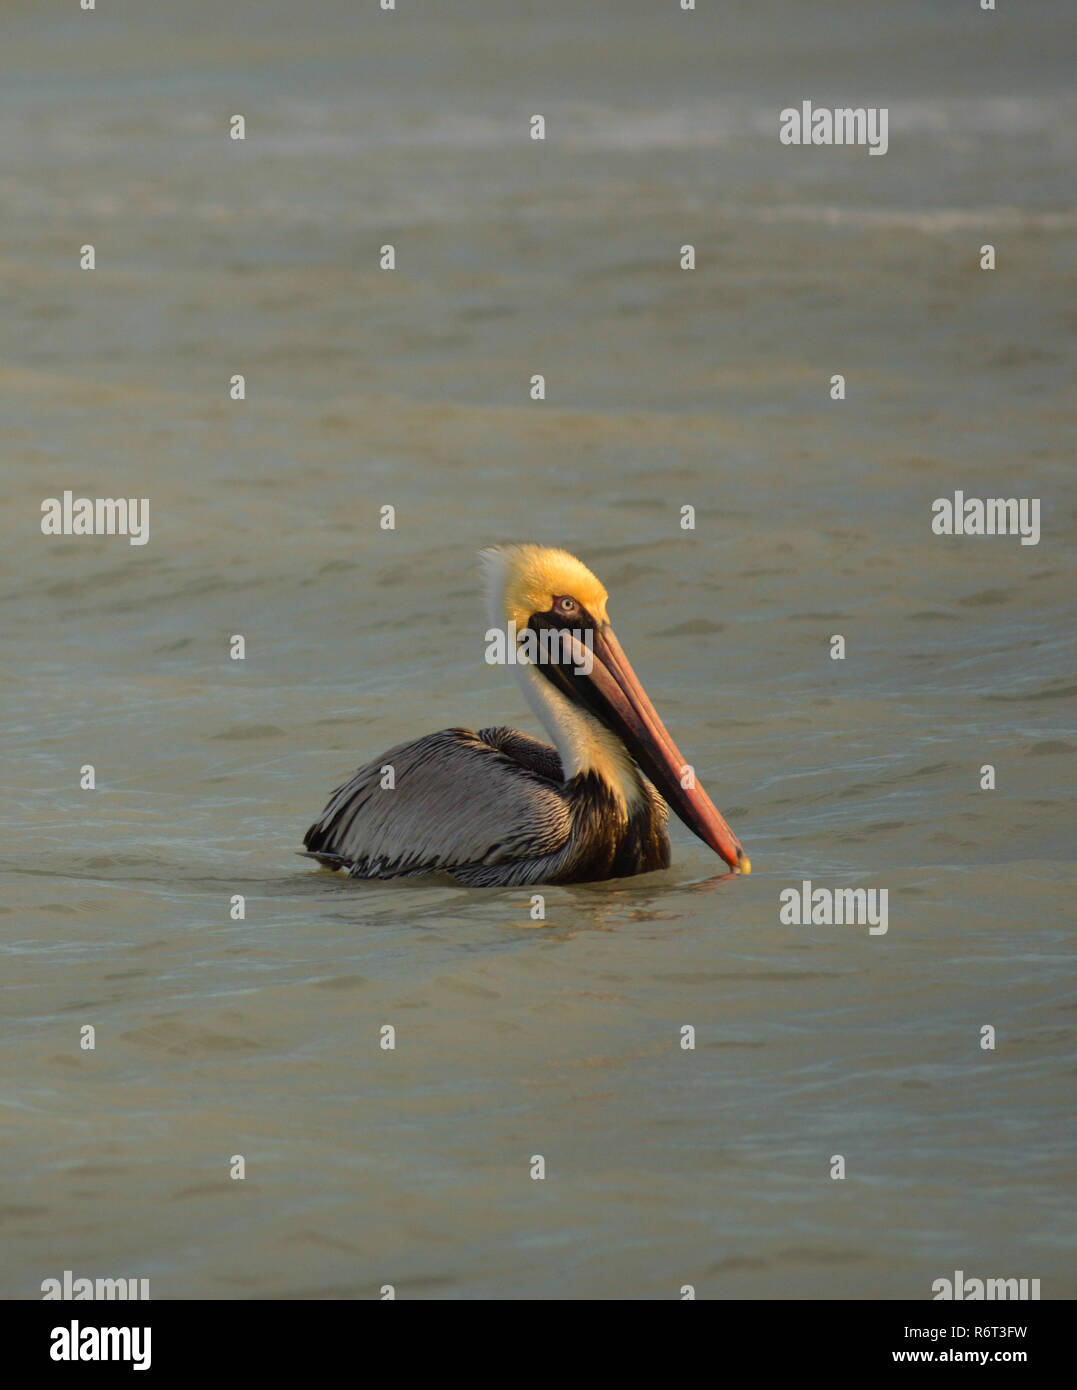 Pelican floating in Gulf of Mexico off Sanibel Island Stock Photo